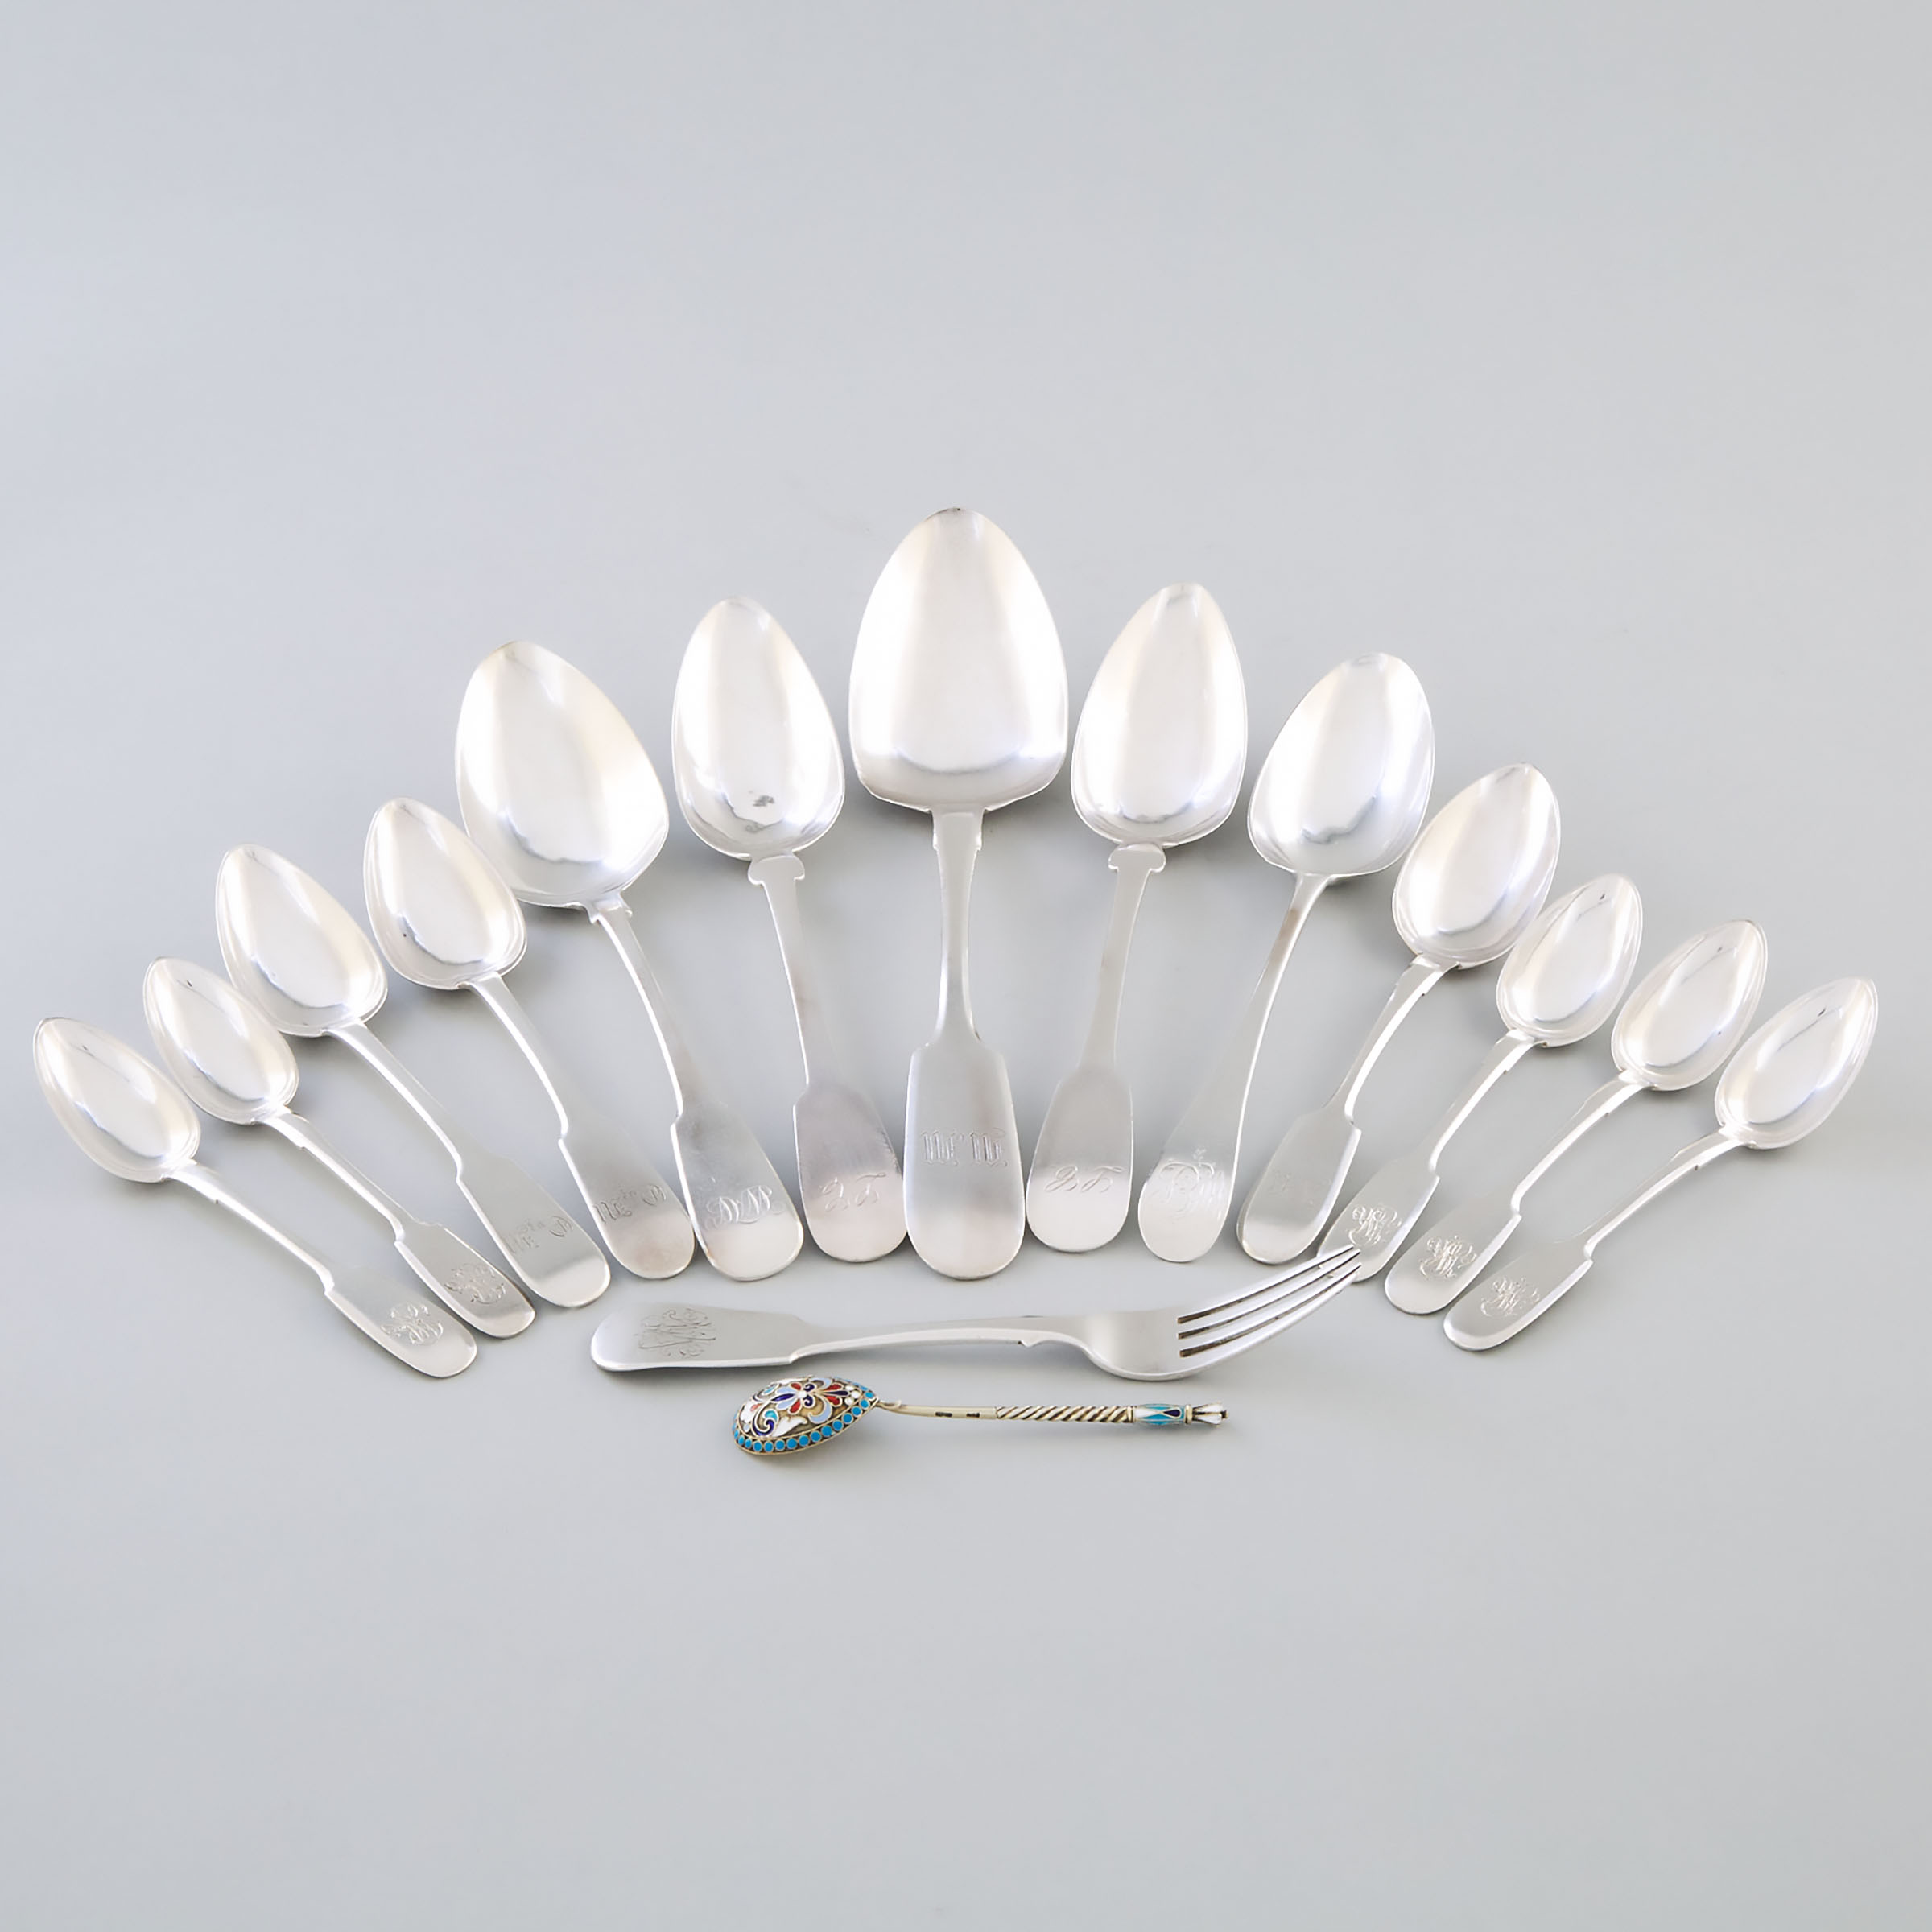 Group of Mainly Russian Silver Fiddle Pattern Flatware, c.1775-1915